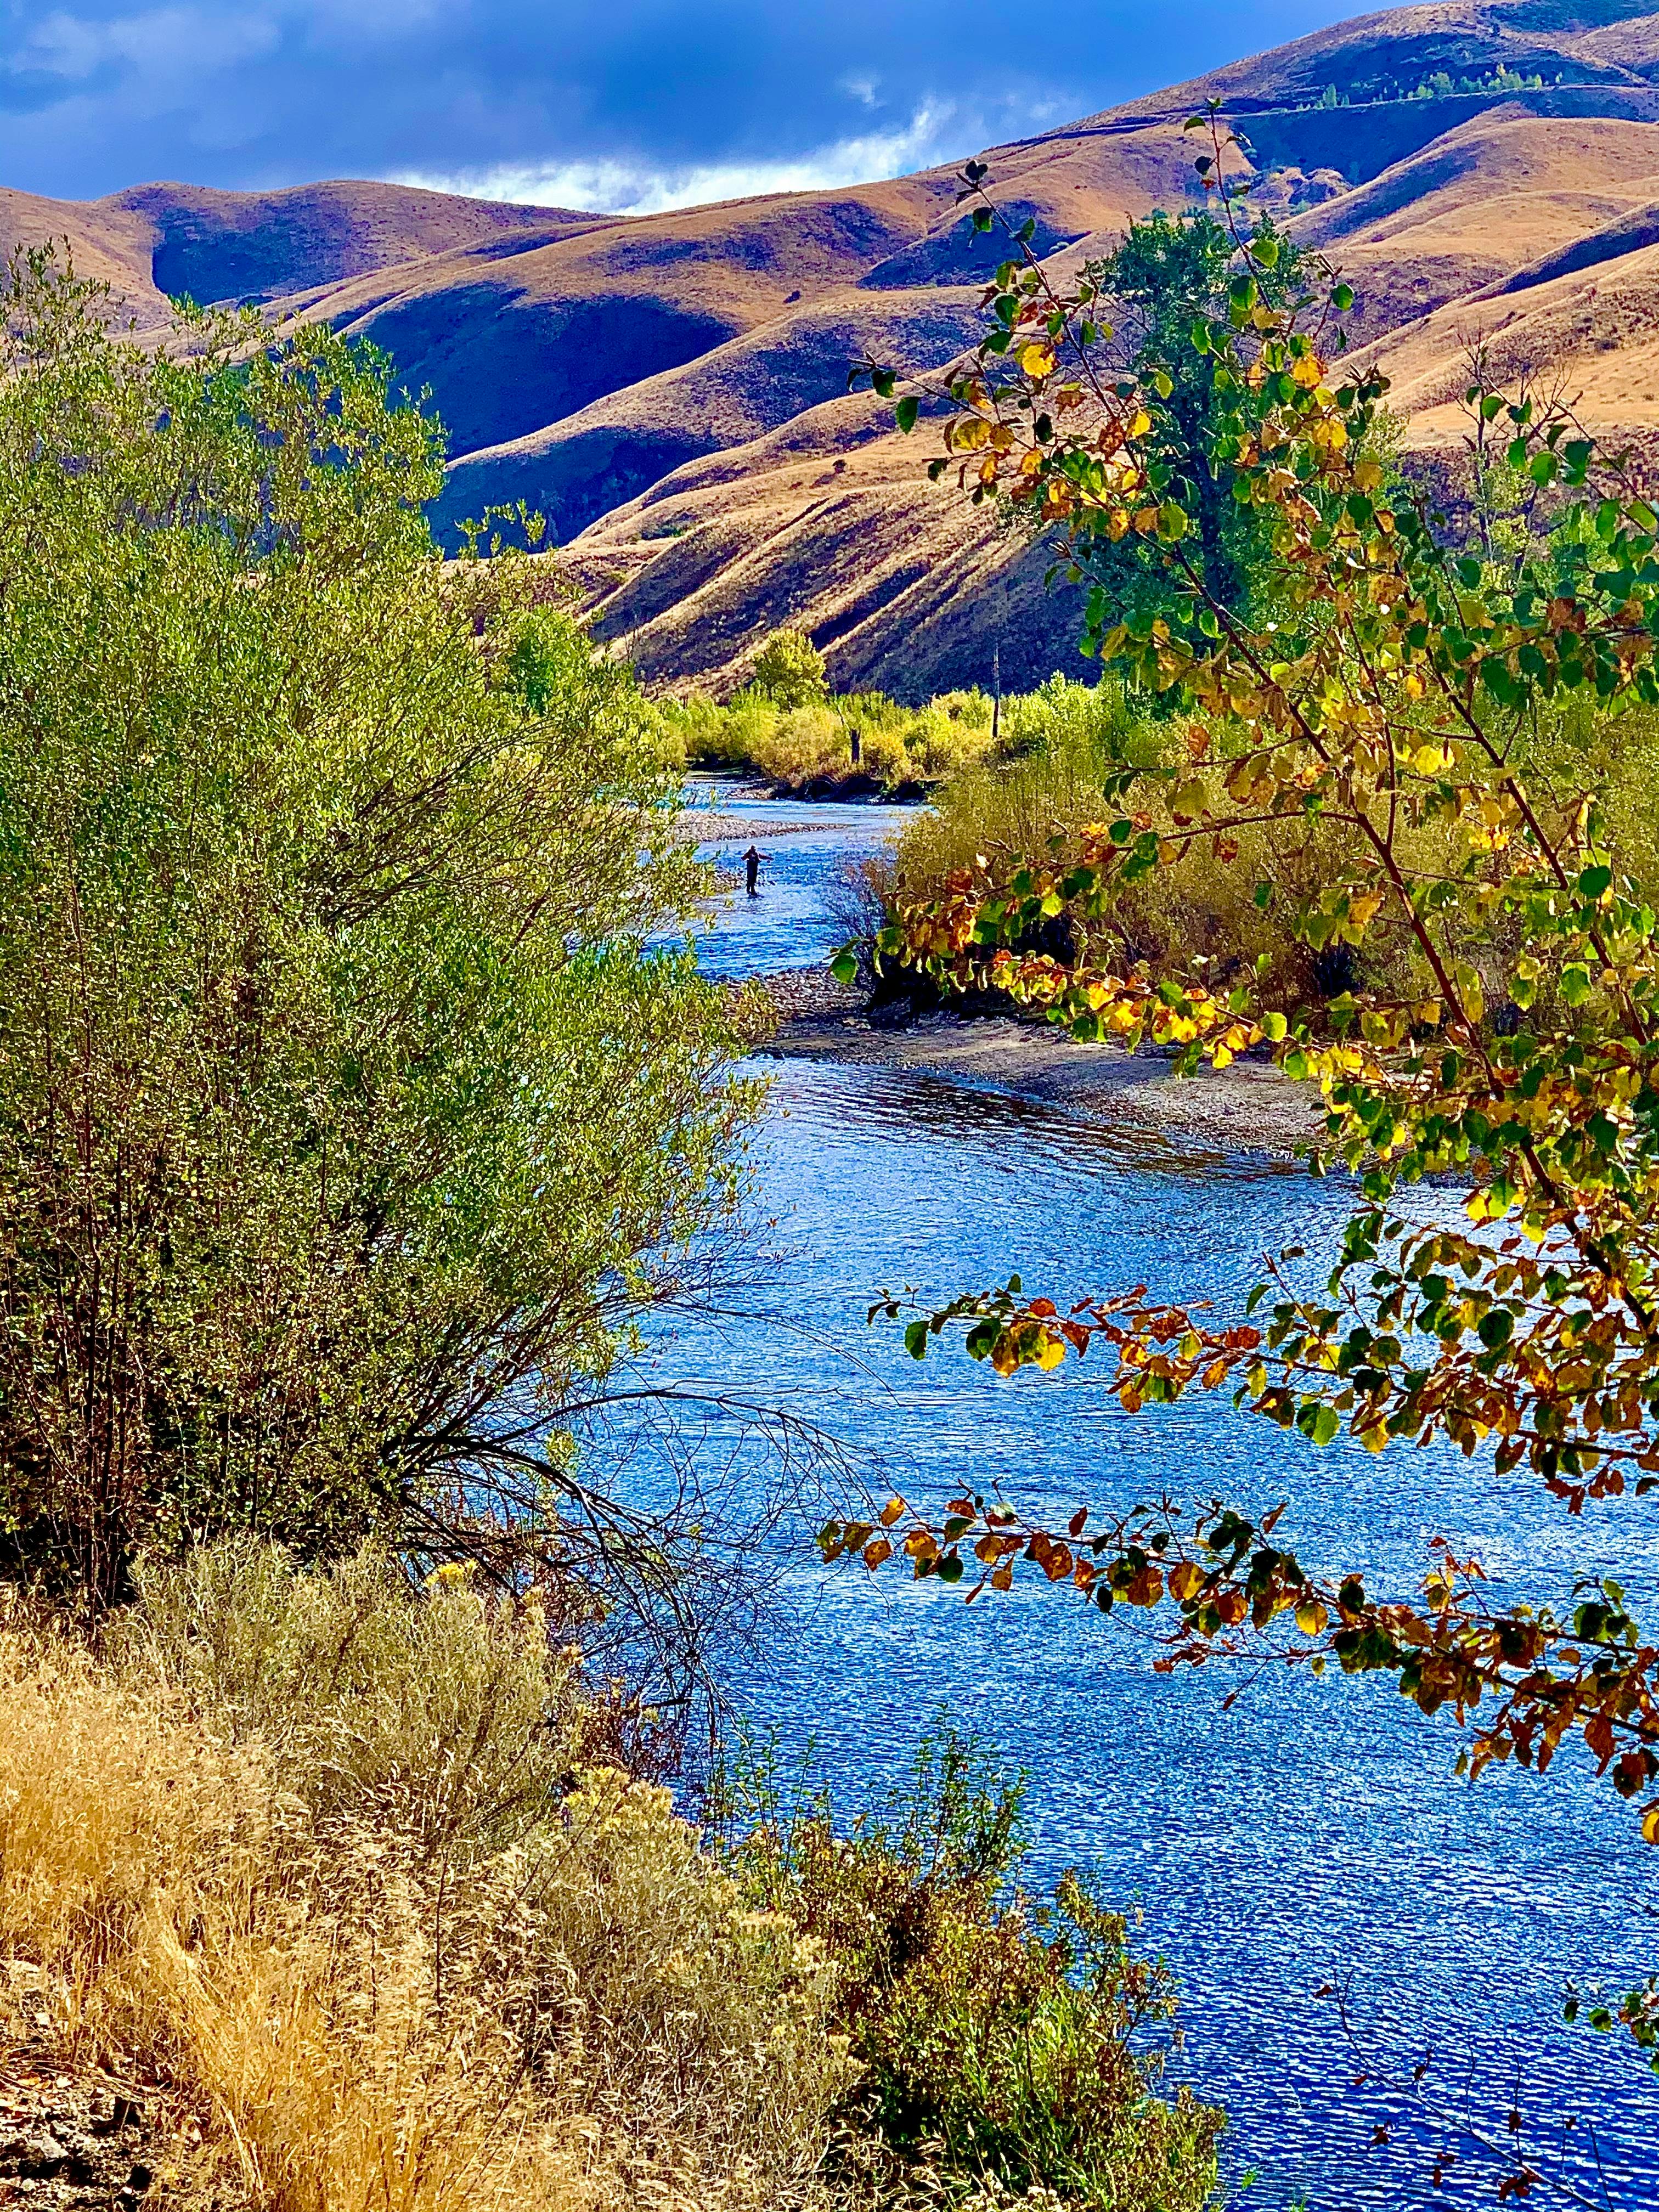 A river is running through a mountainous landscape with trees. In the distance you can see a fly fisher in the river.